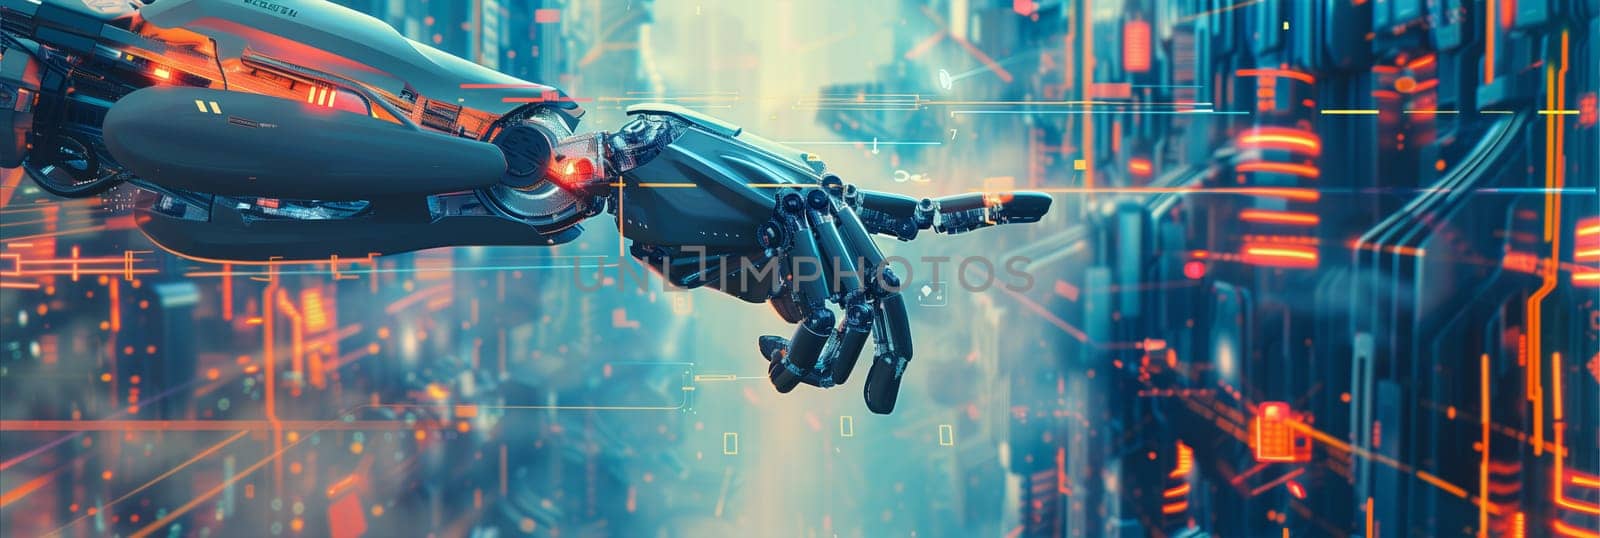 A robot soaring through a technologically advanced urban landscape filled with skyscrapers and neon lights.